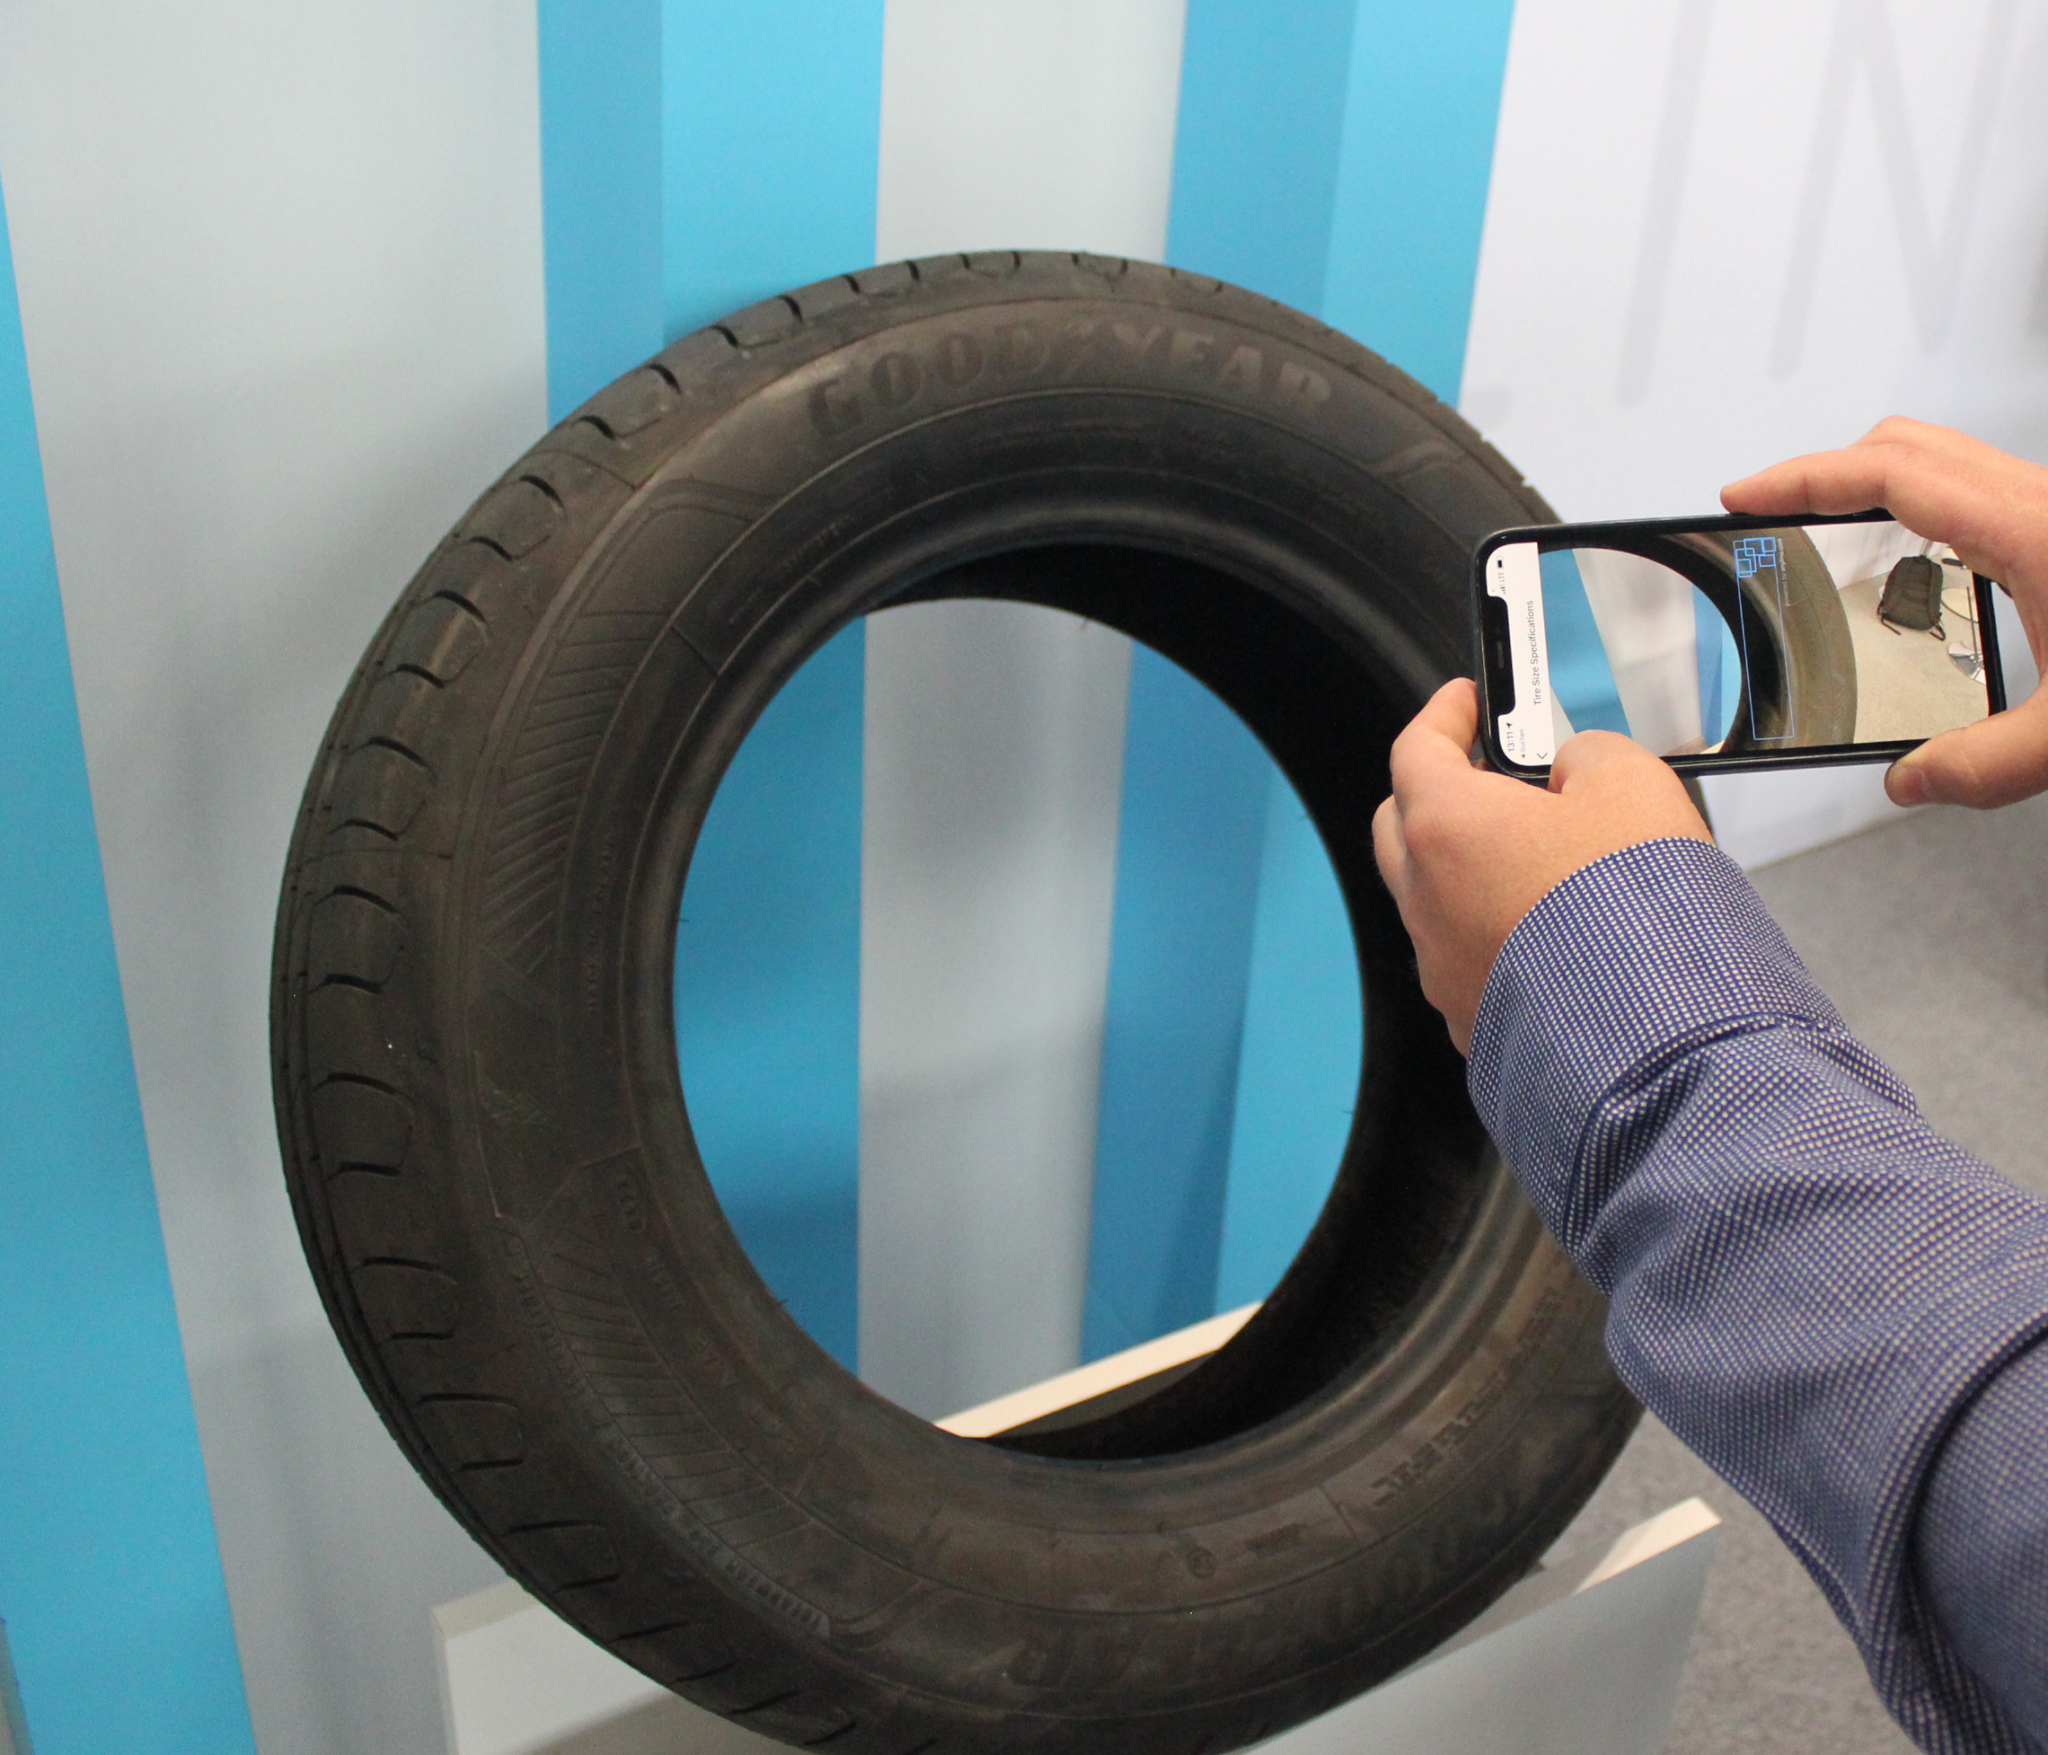 Tyre sidewall scanning technology from Anyline